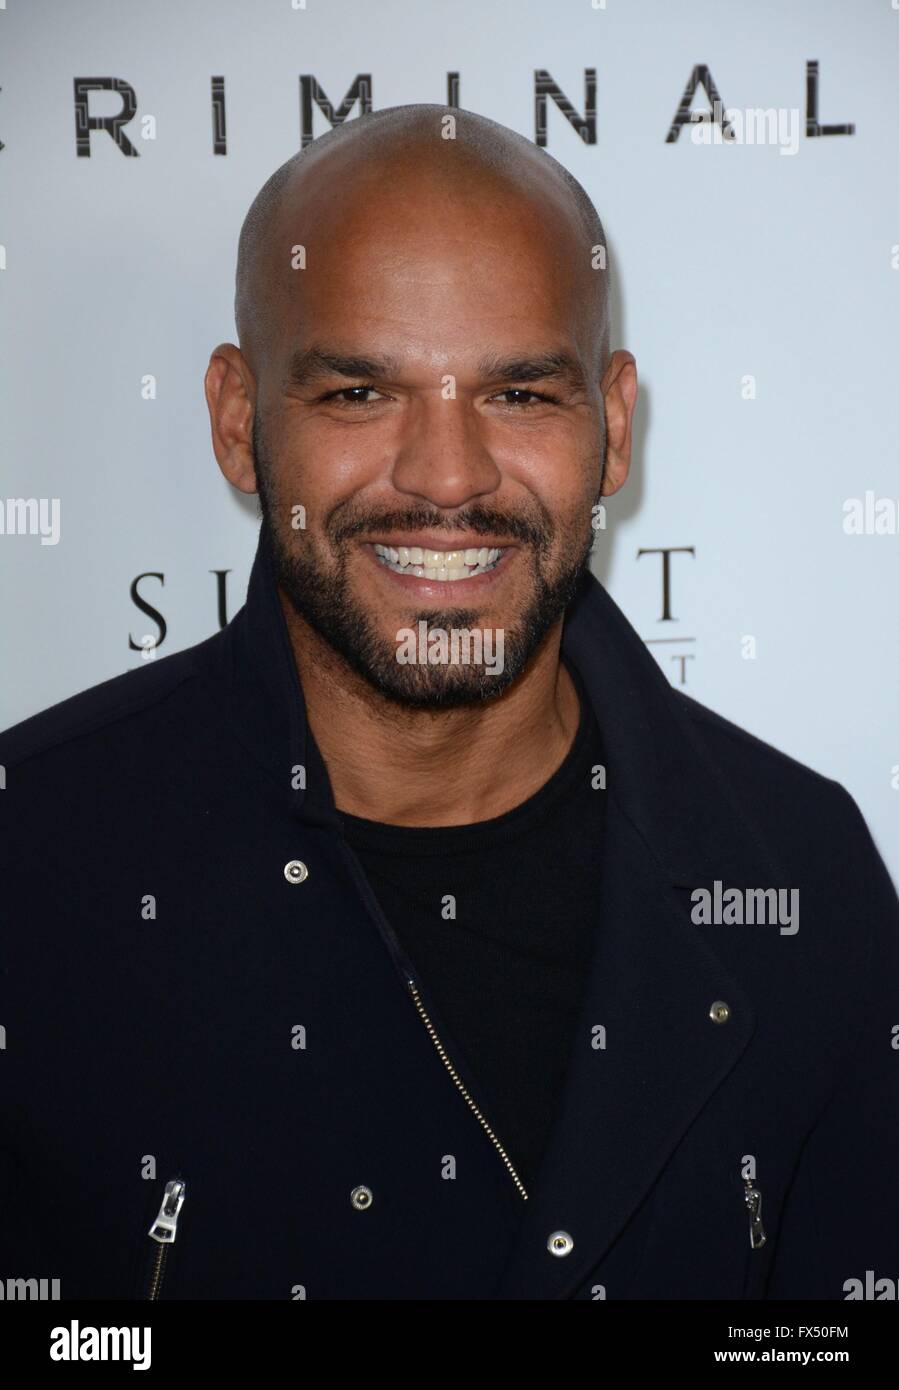 New York, NY, USA. 11th Apr, 2016. Amaury Nolasco at arrivals for CRIMINAL Premiere, AMC Loews Lincoln Sqaure, New York, NY April 11, 2016. Credit:  Derek Storm/Everett Collection/Alamy Live News Stock Photo